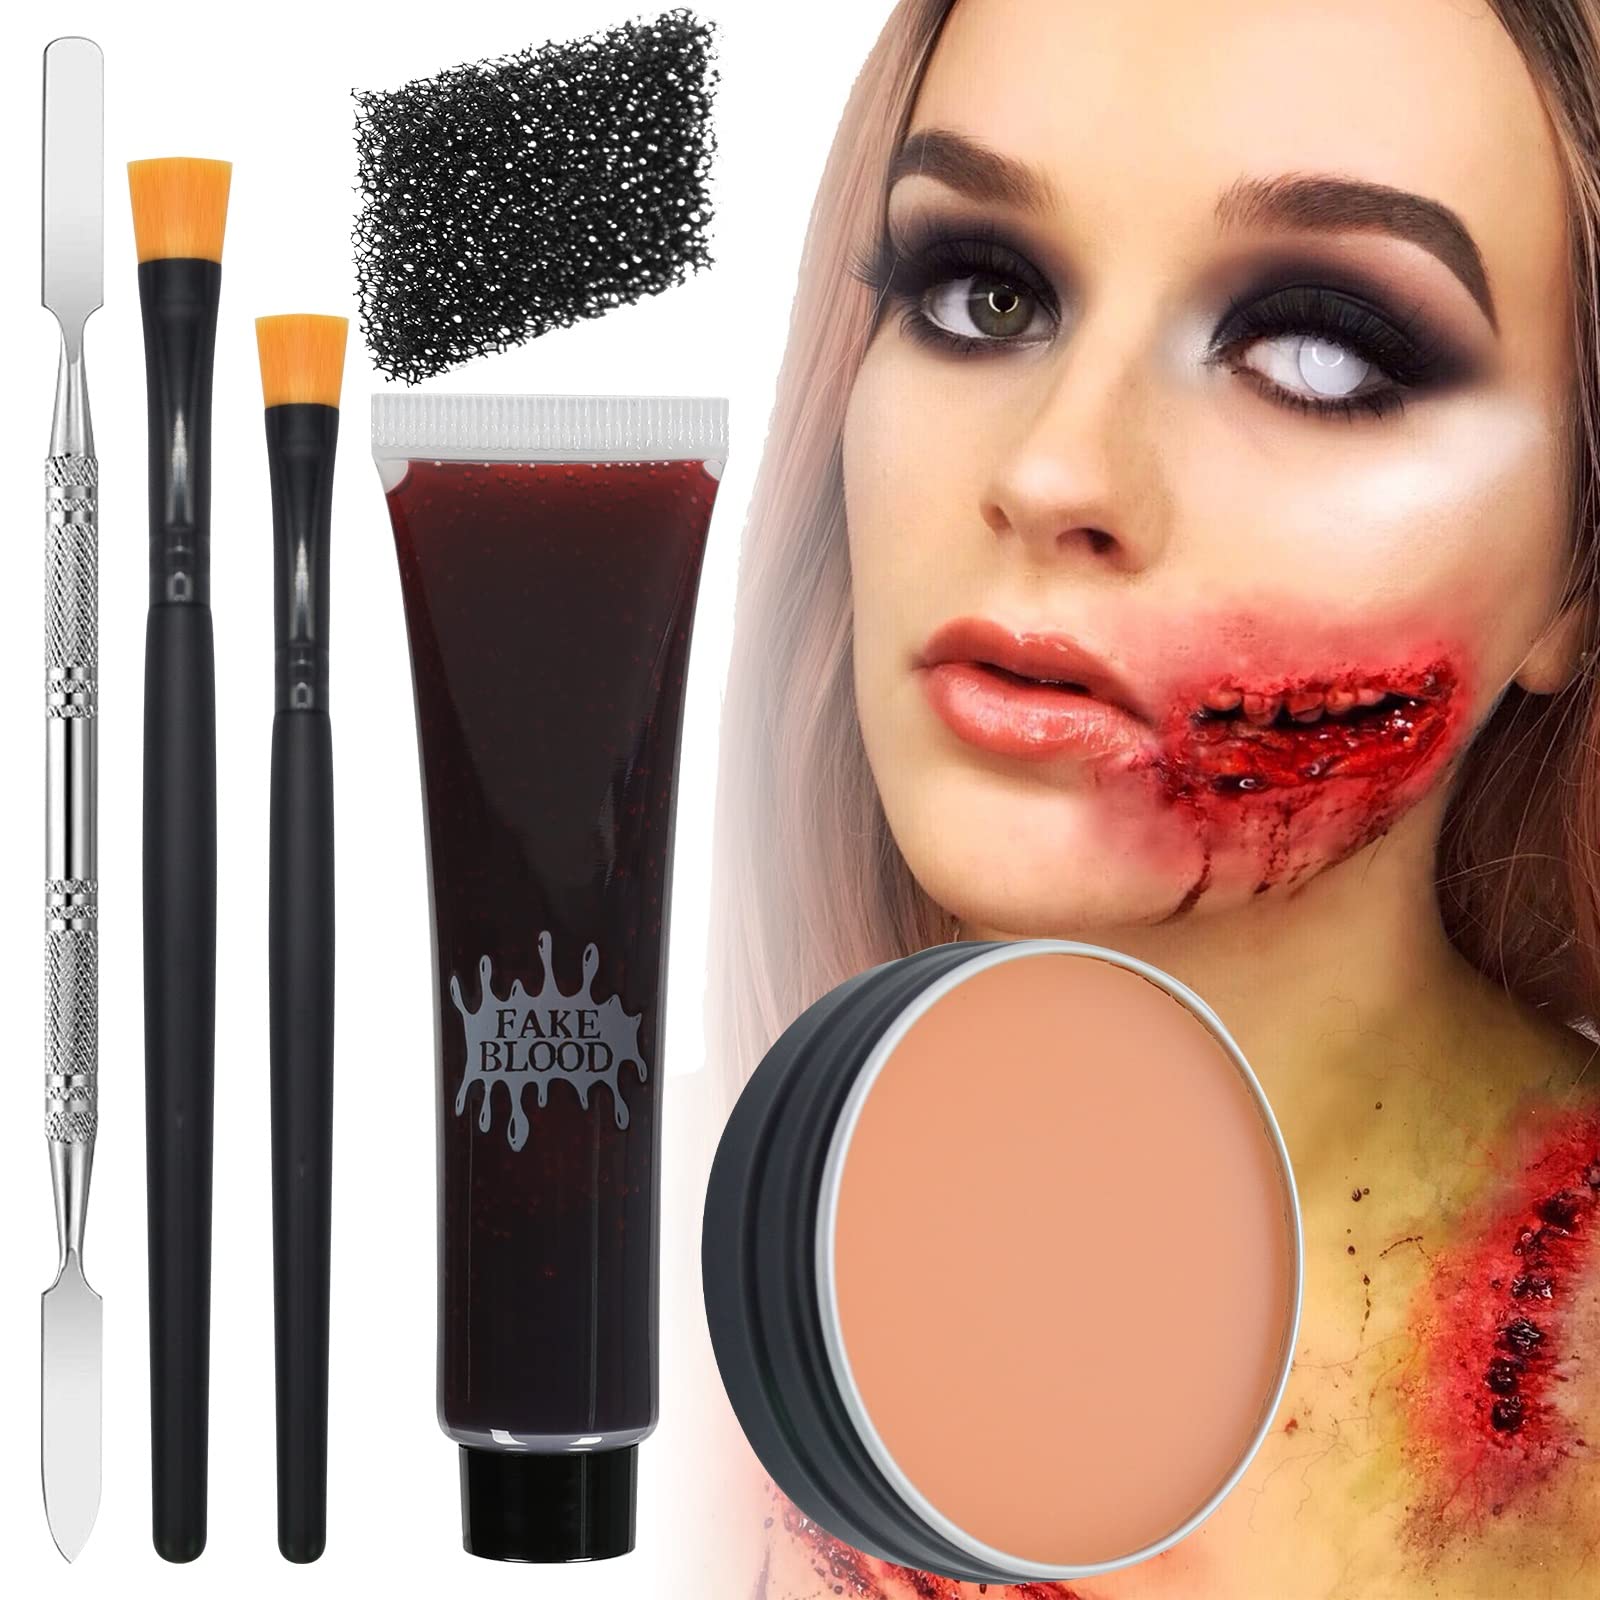 PHOEBE Halloween Makeup Kit Scar Wax SFX Makeup Kit for Special Effects  Makeup Ideal to Use